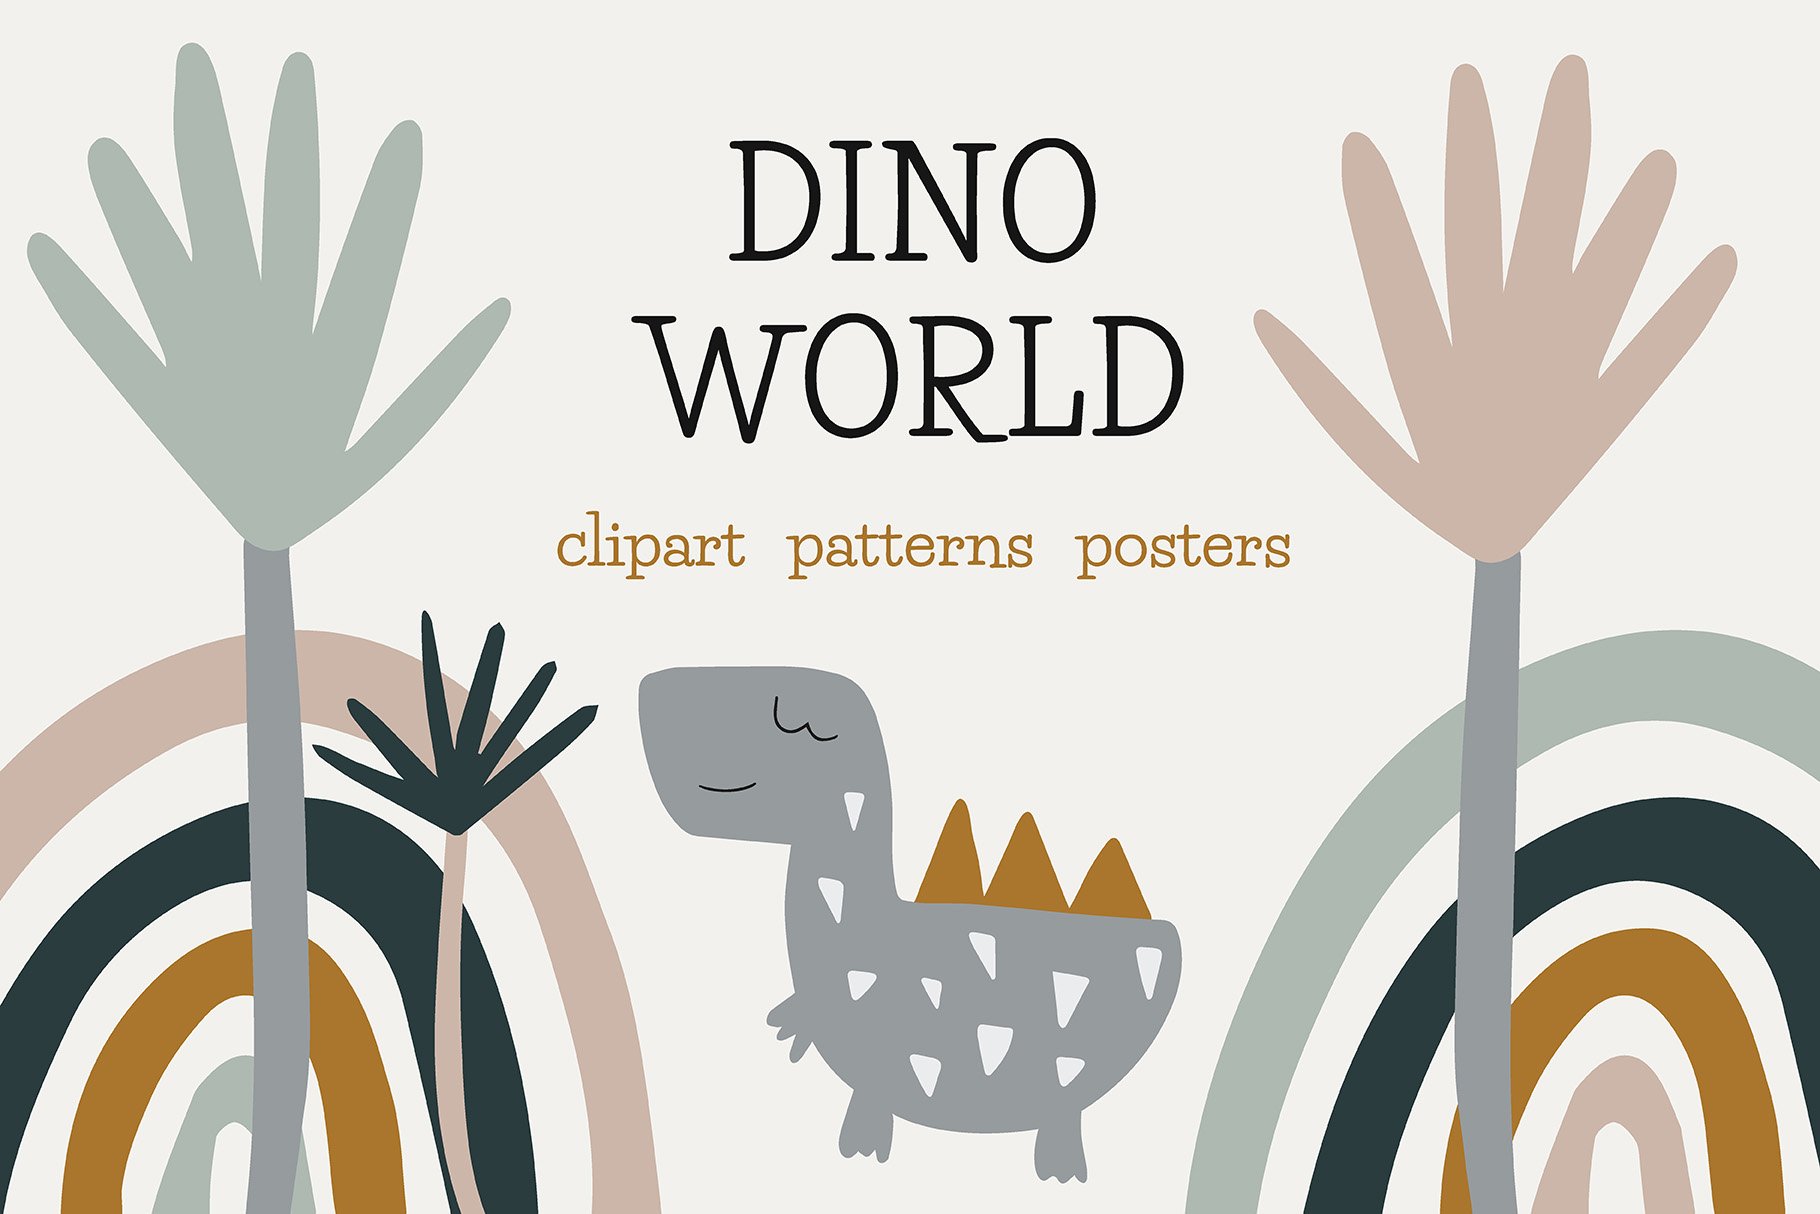 Dino world! Patterns and arts cover image.